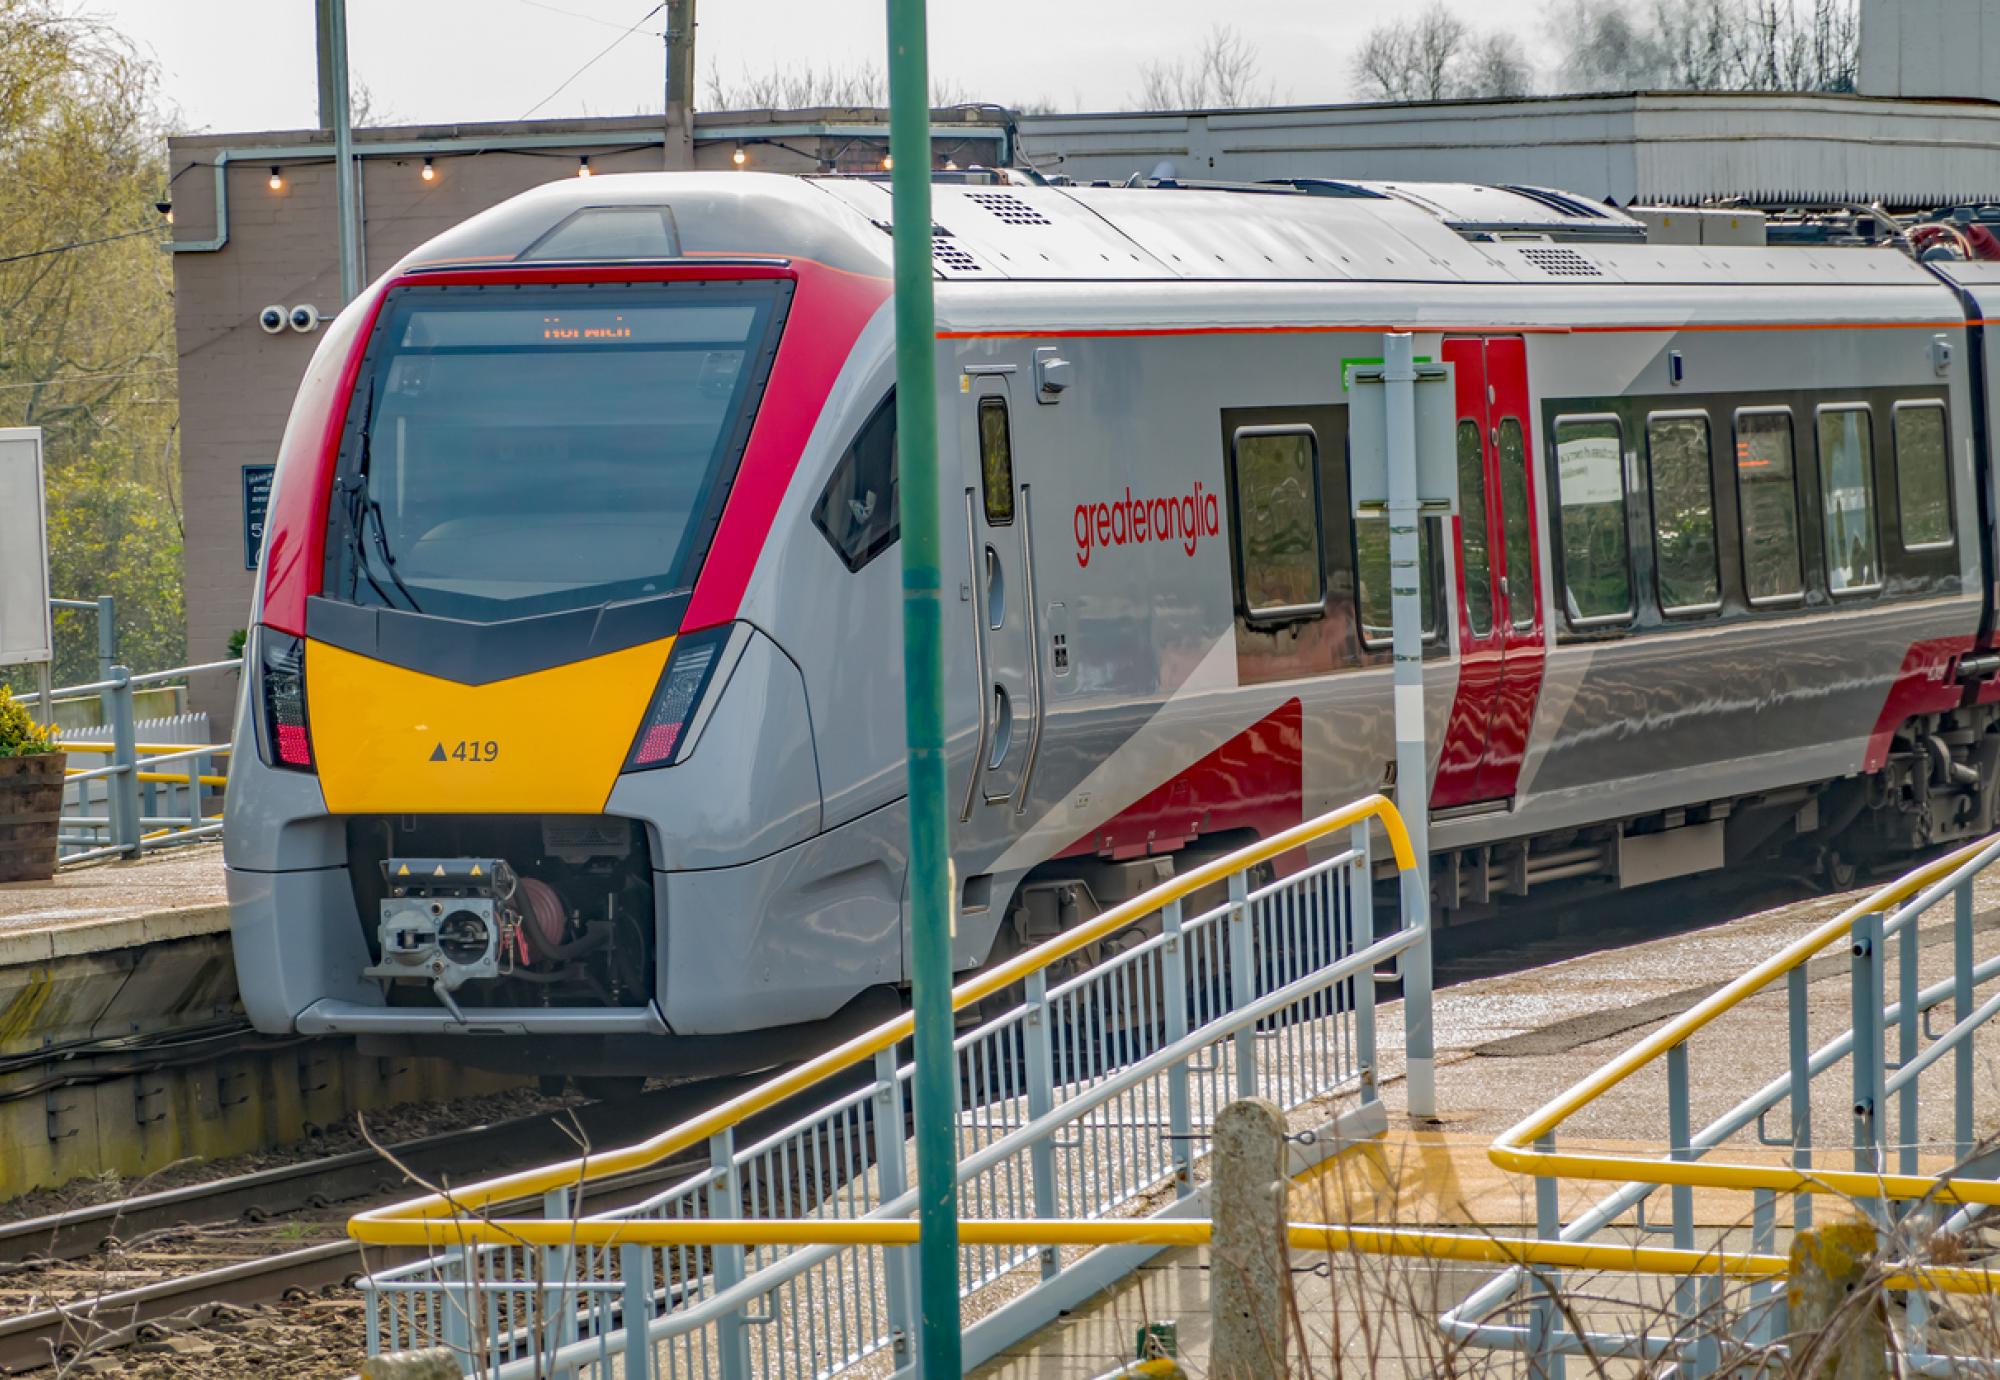 Greater Anglia train at station